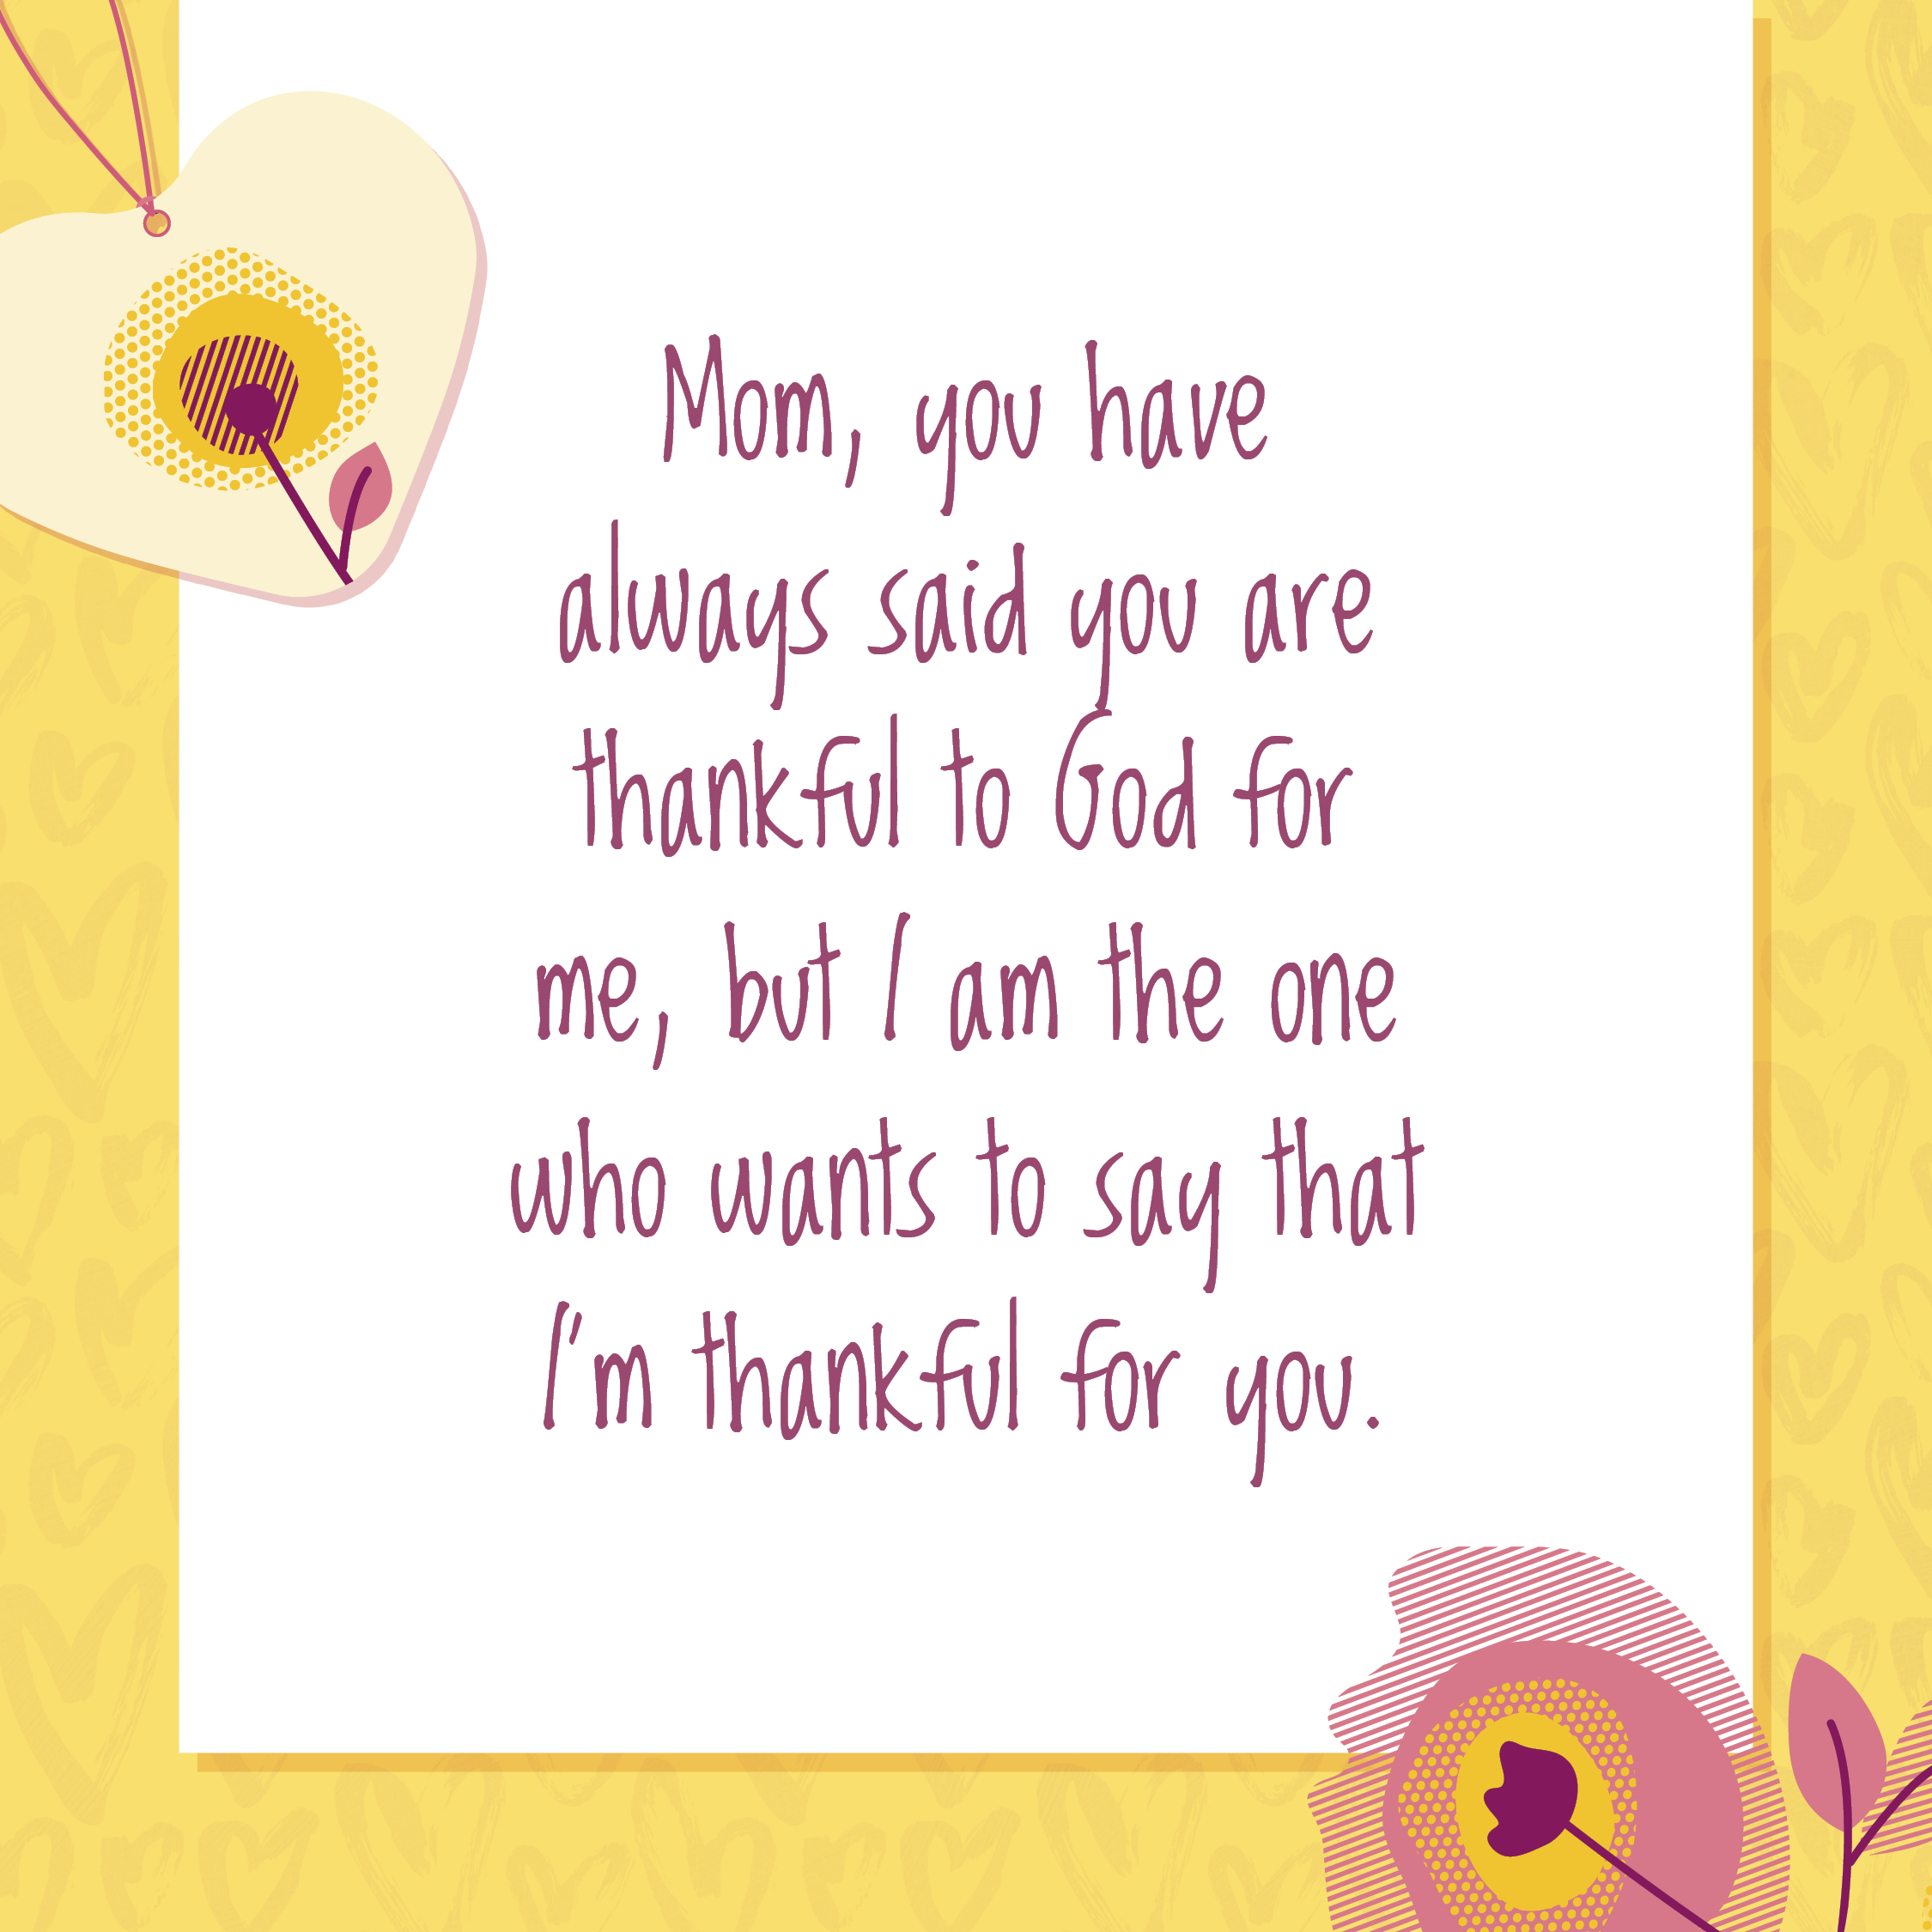 Mom, you have always said you are thankful to God for me, but I am the one who wants to say that I'm thankful for you.